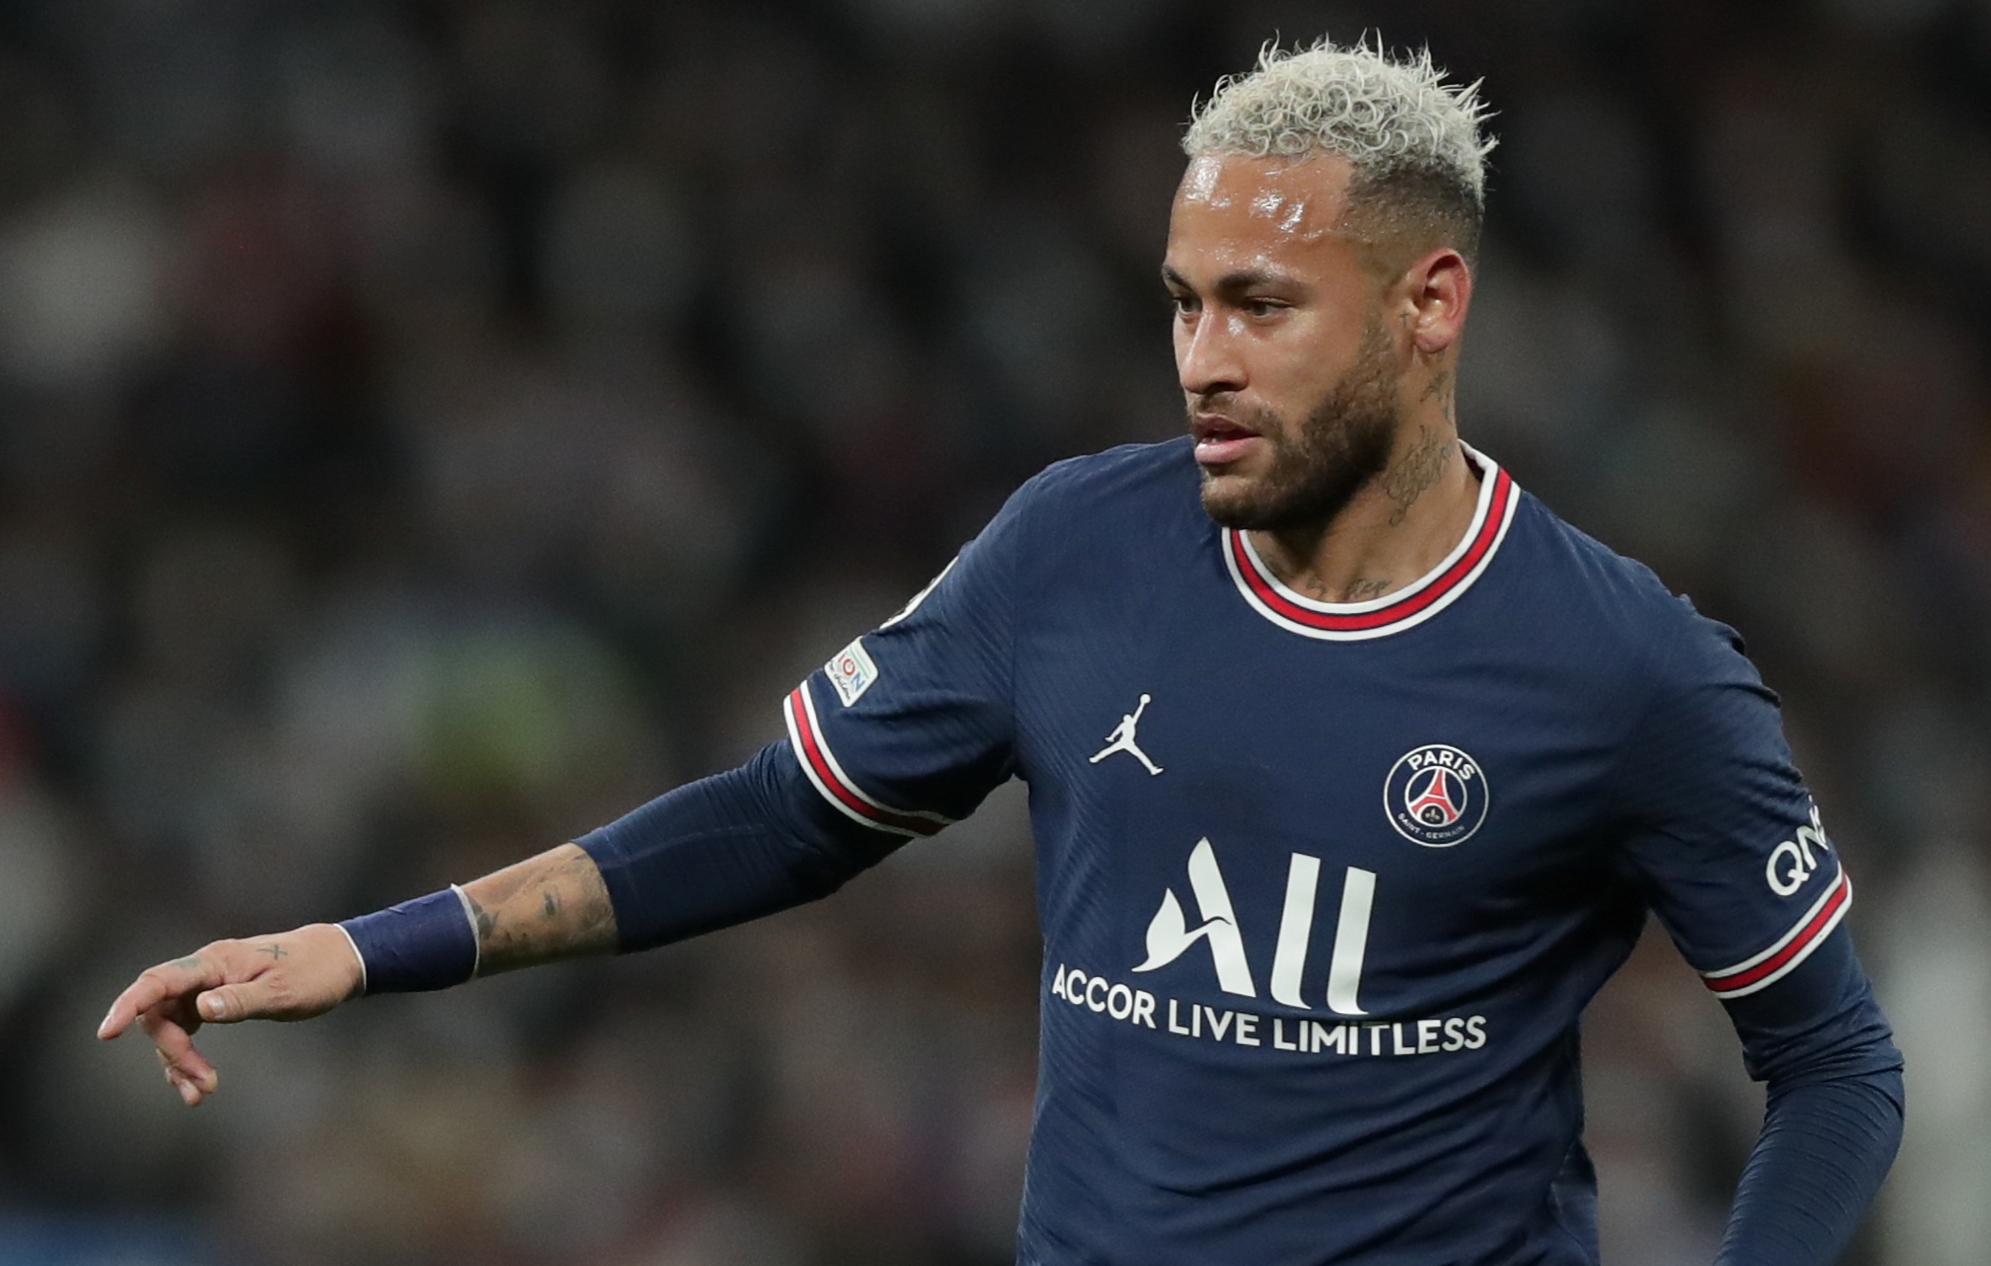 PSG could decide to get rid of Neymar after Real Madrid defeat